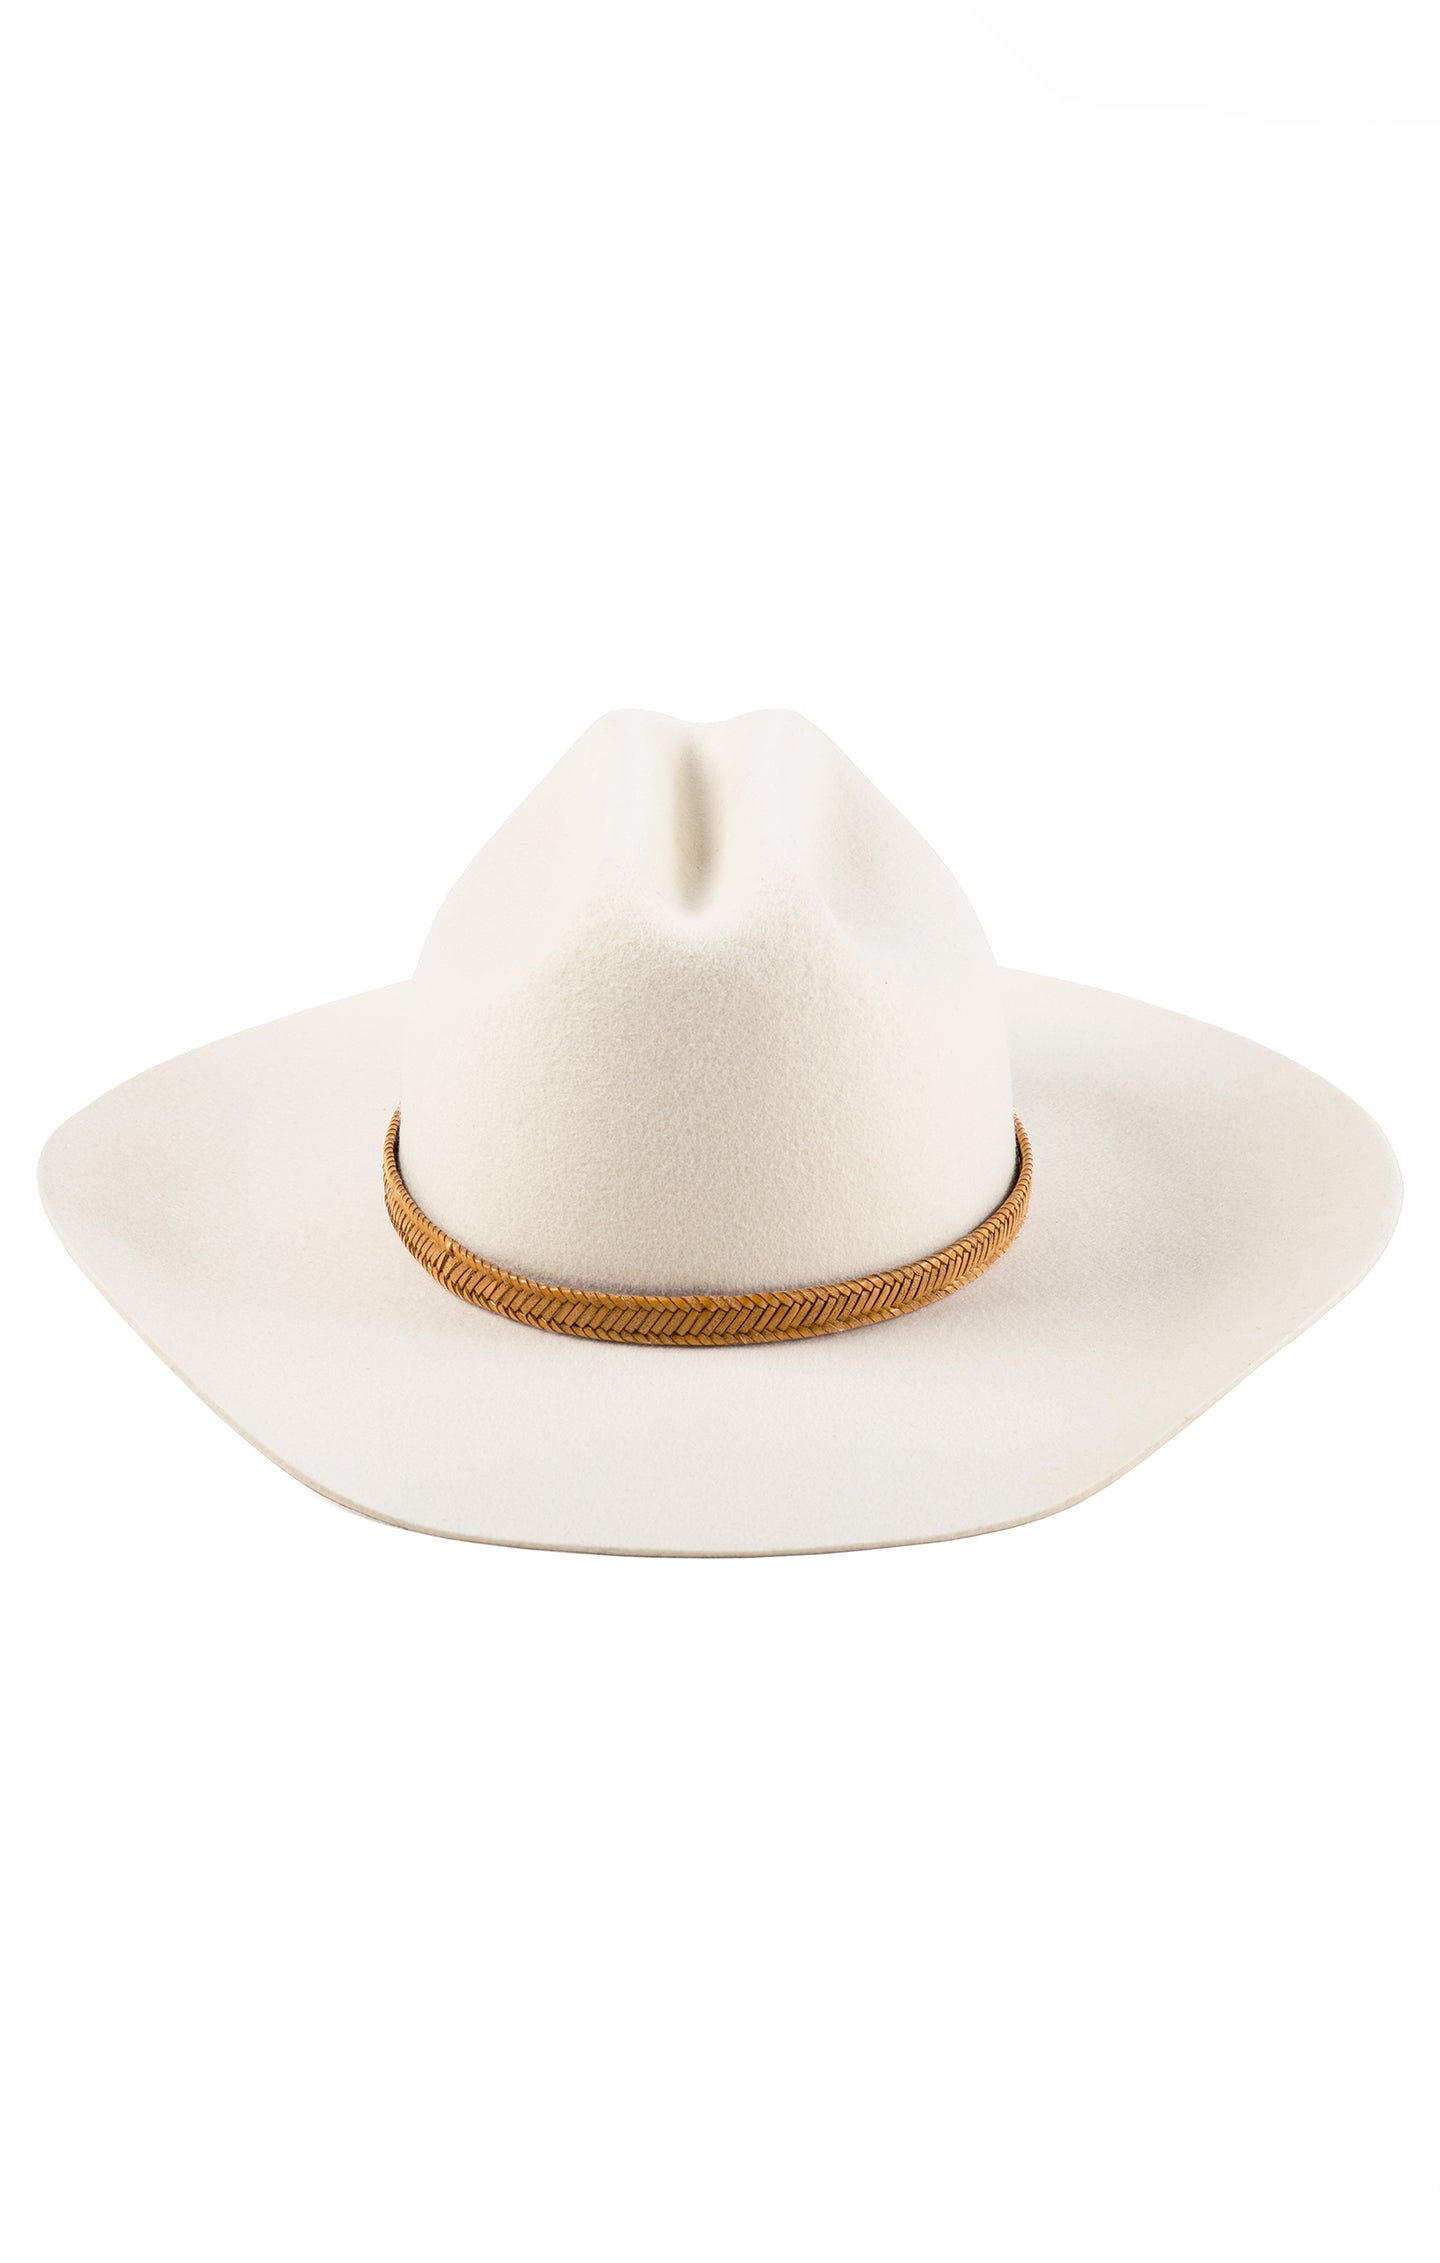 Western & Country Hats For Men  Lack Of Color US – Lack of Color US